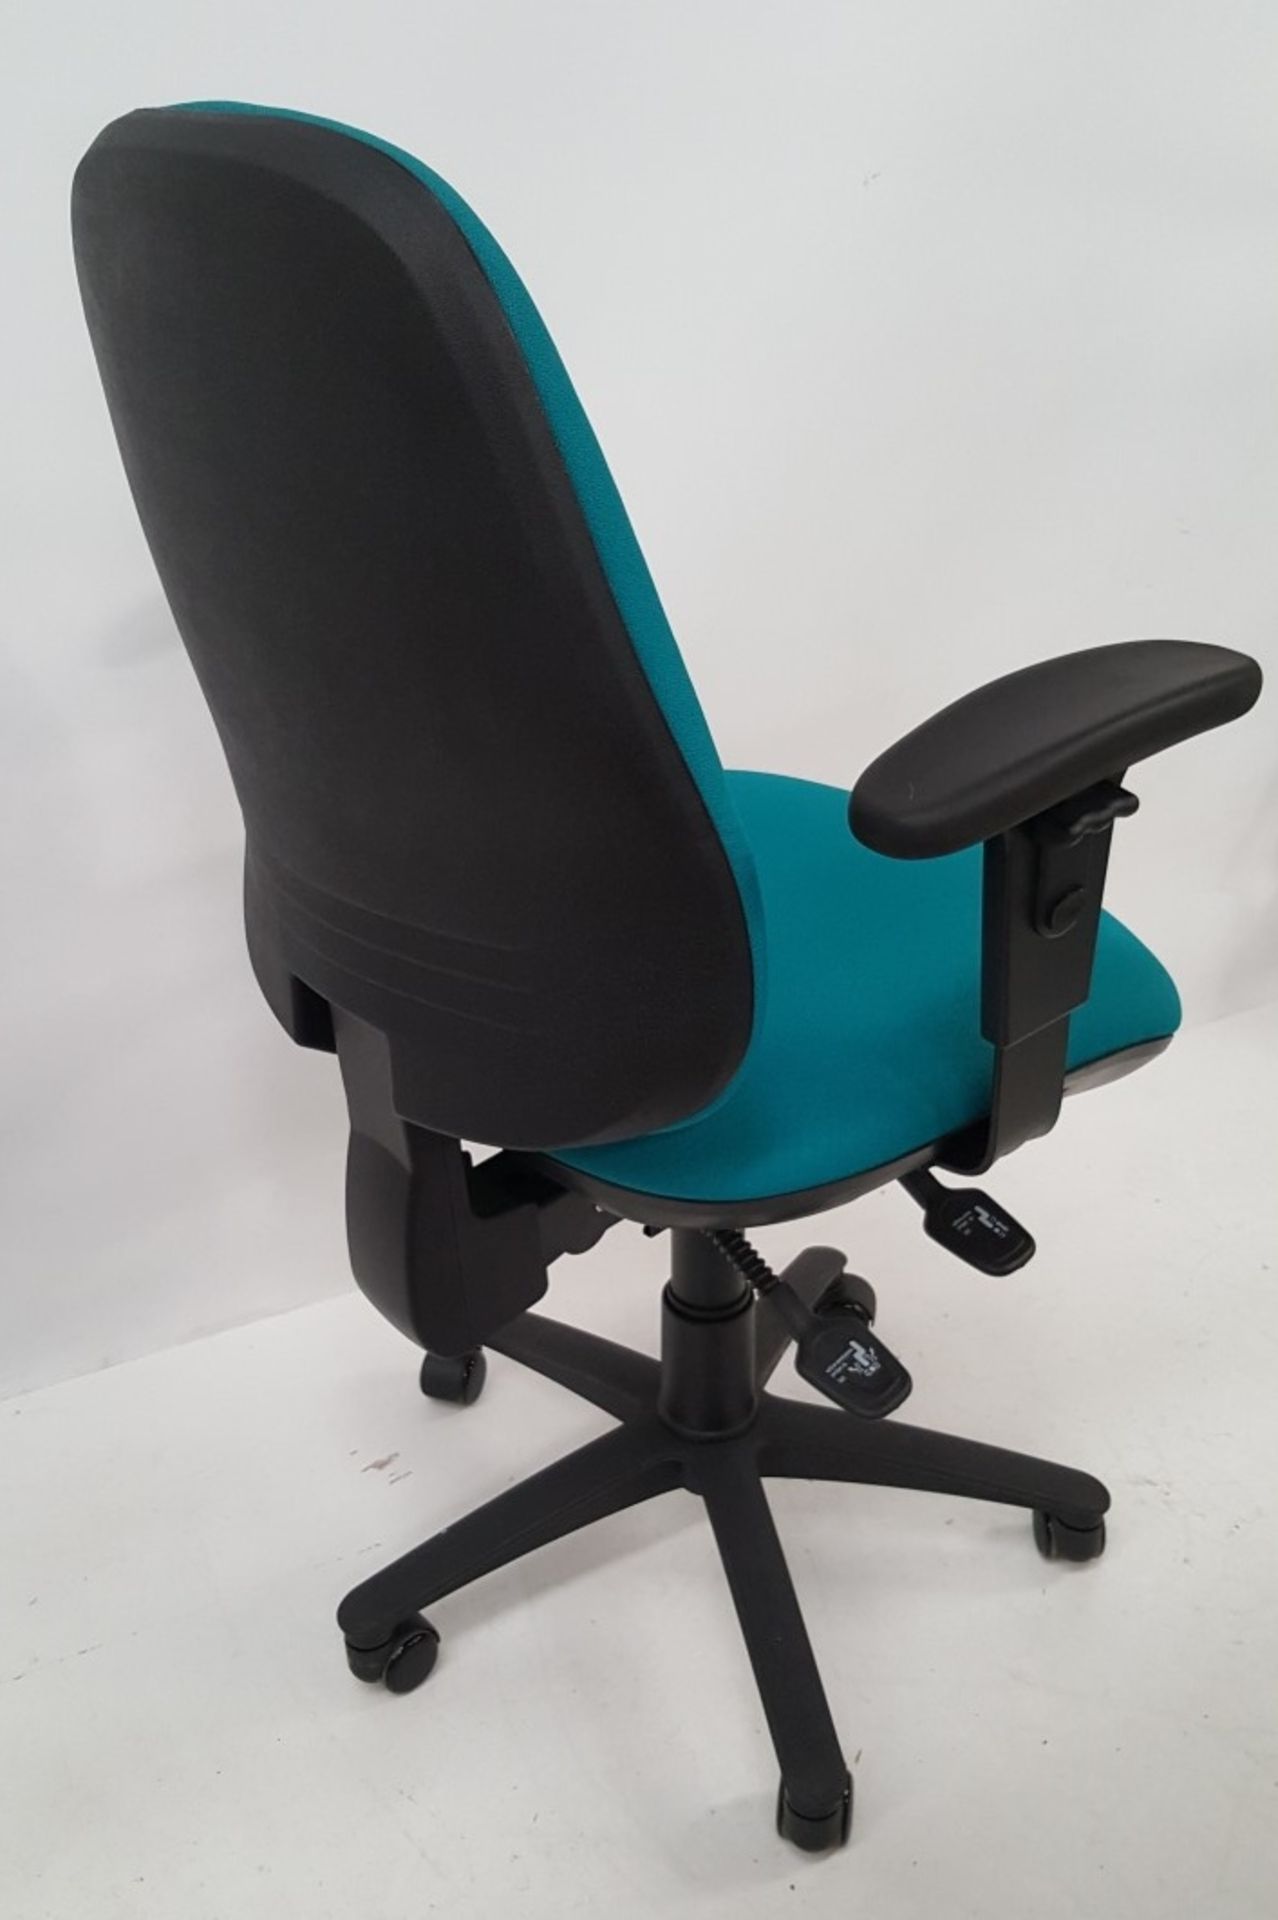 4 x Turquoise Blue Double Lever Office Chairs - Ref CBU44 - Image 7 of 7